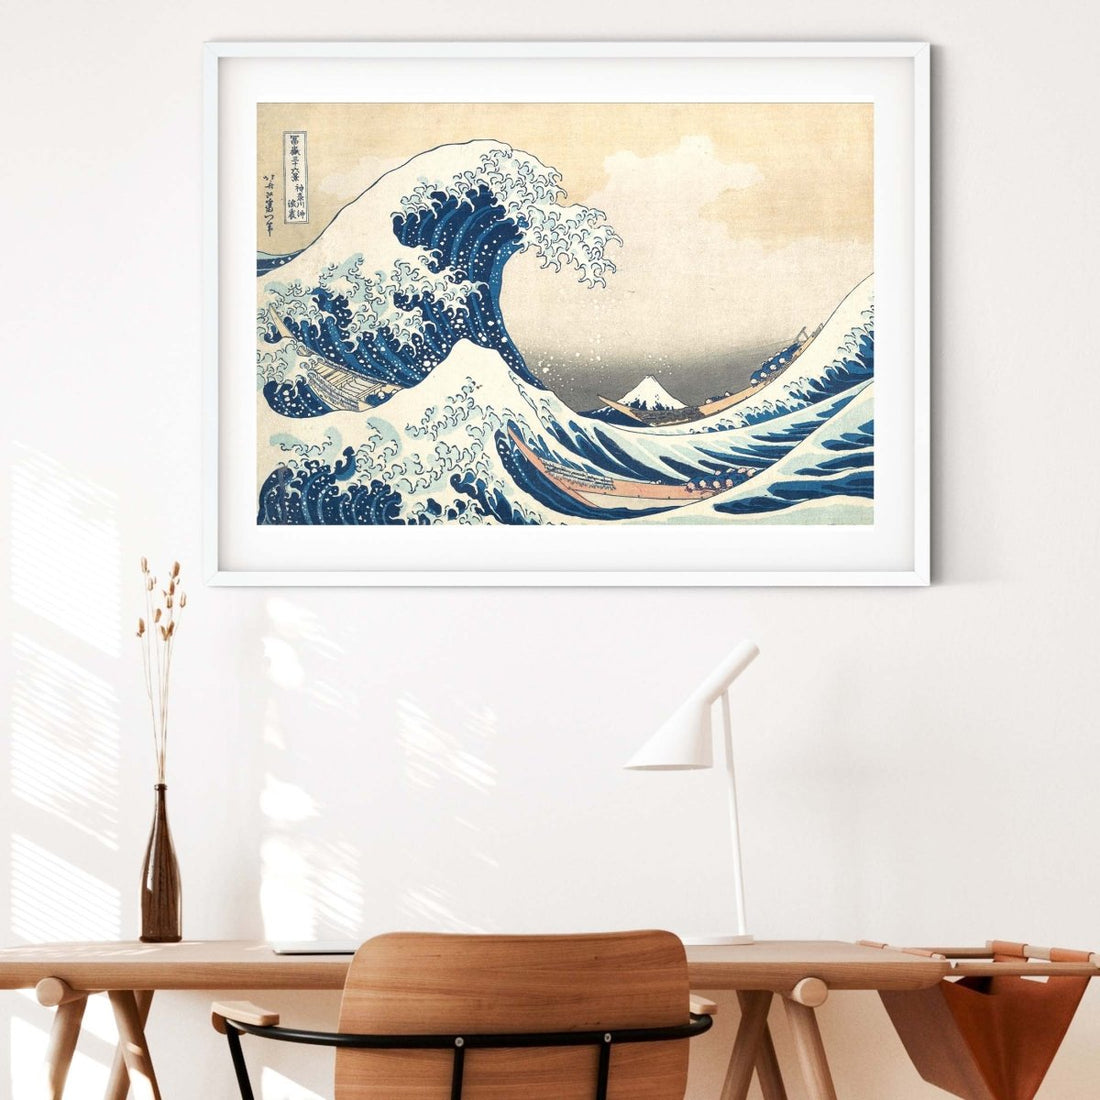 What Is The Story Behind Hokusai's Famous Japanese Wave Print?